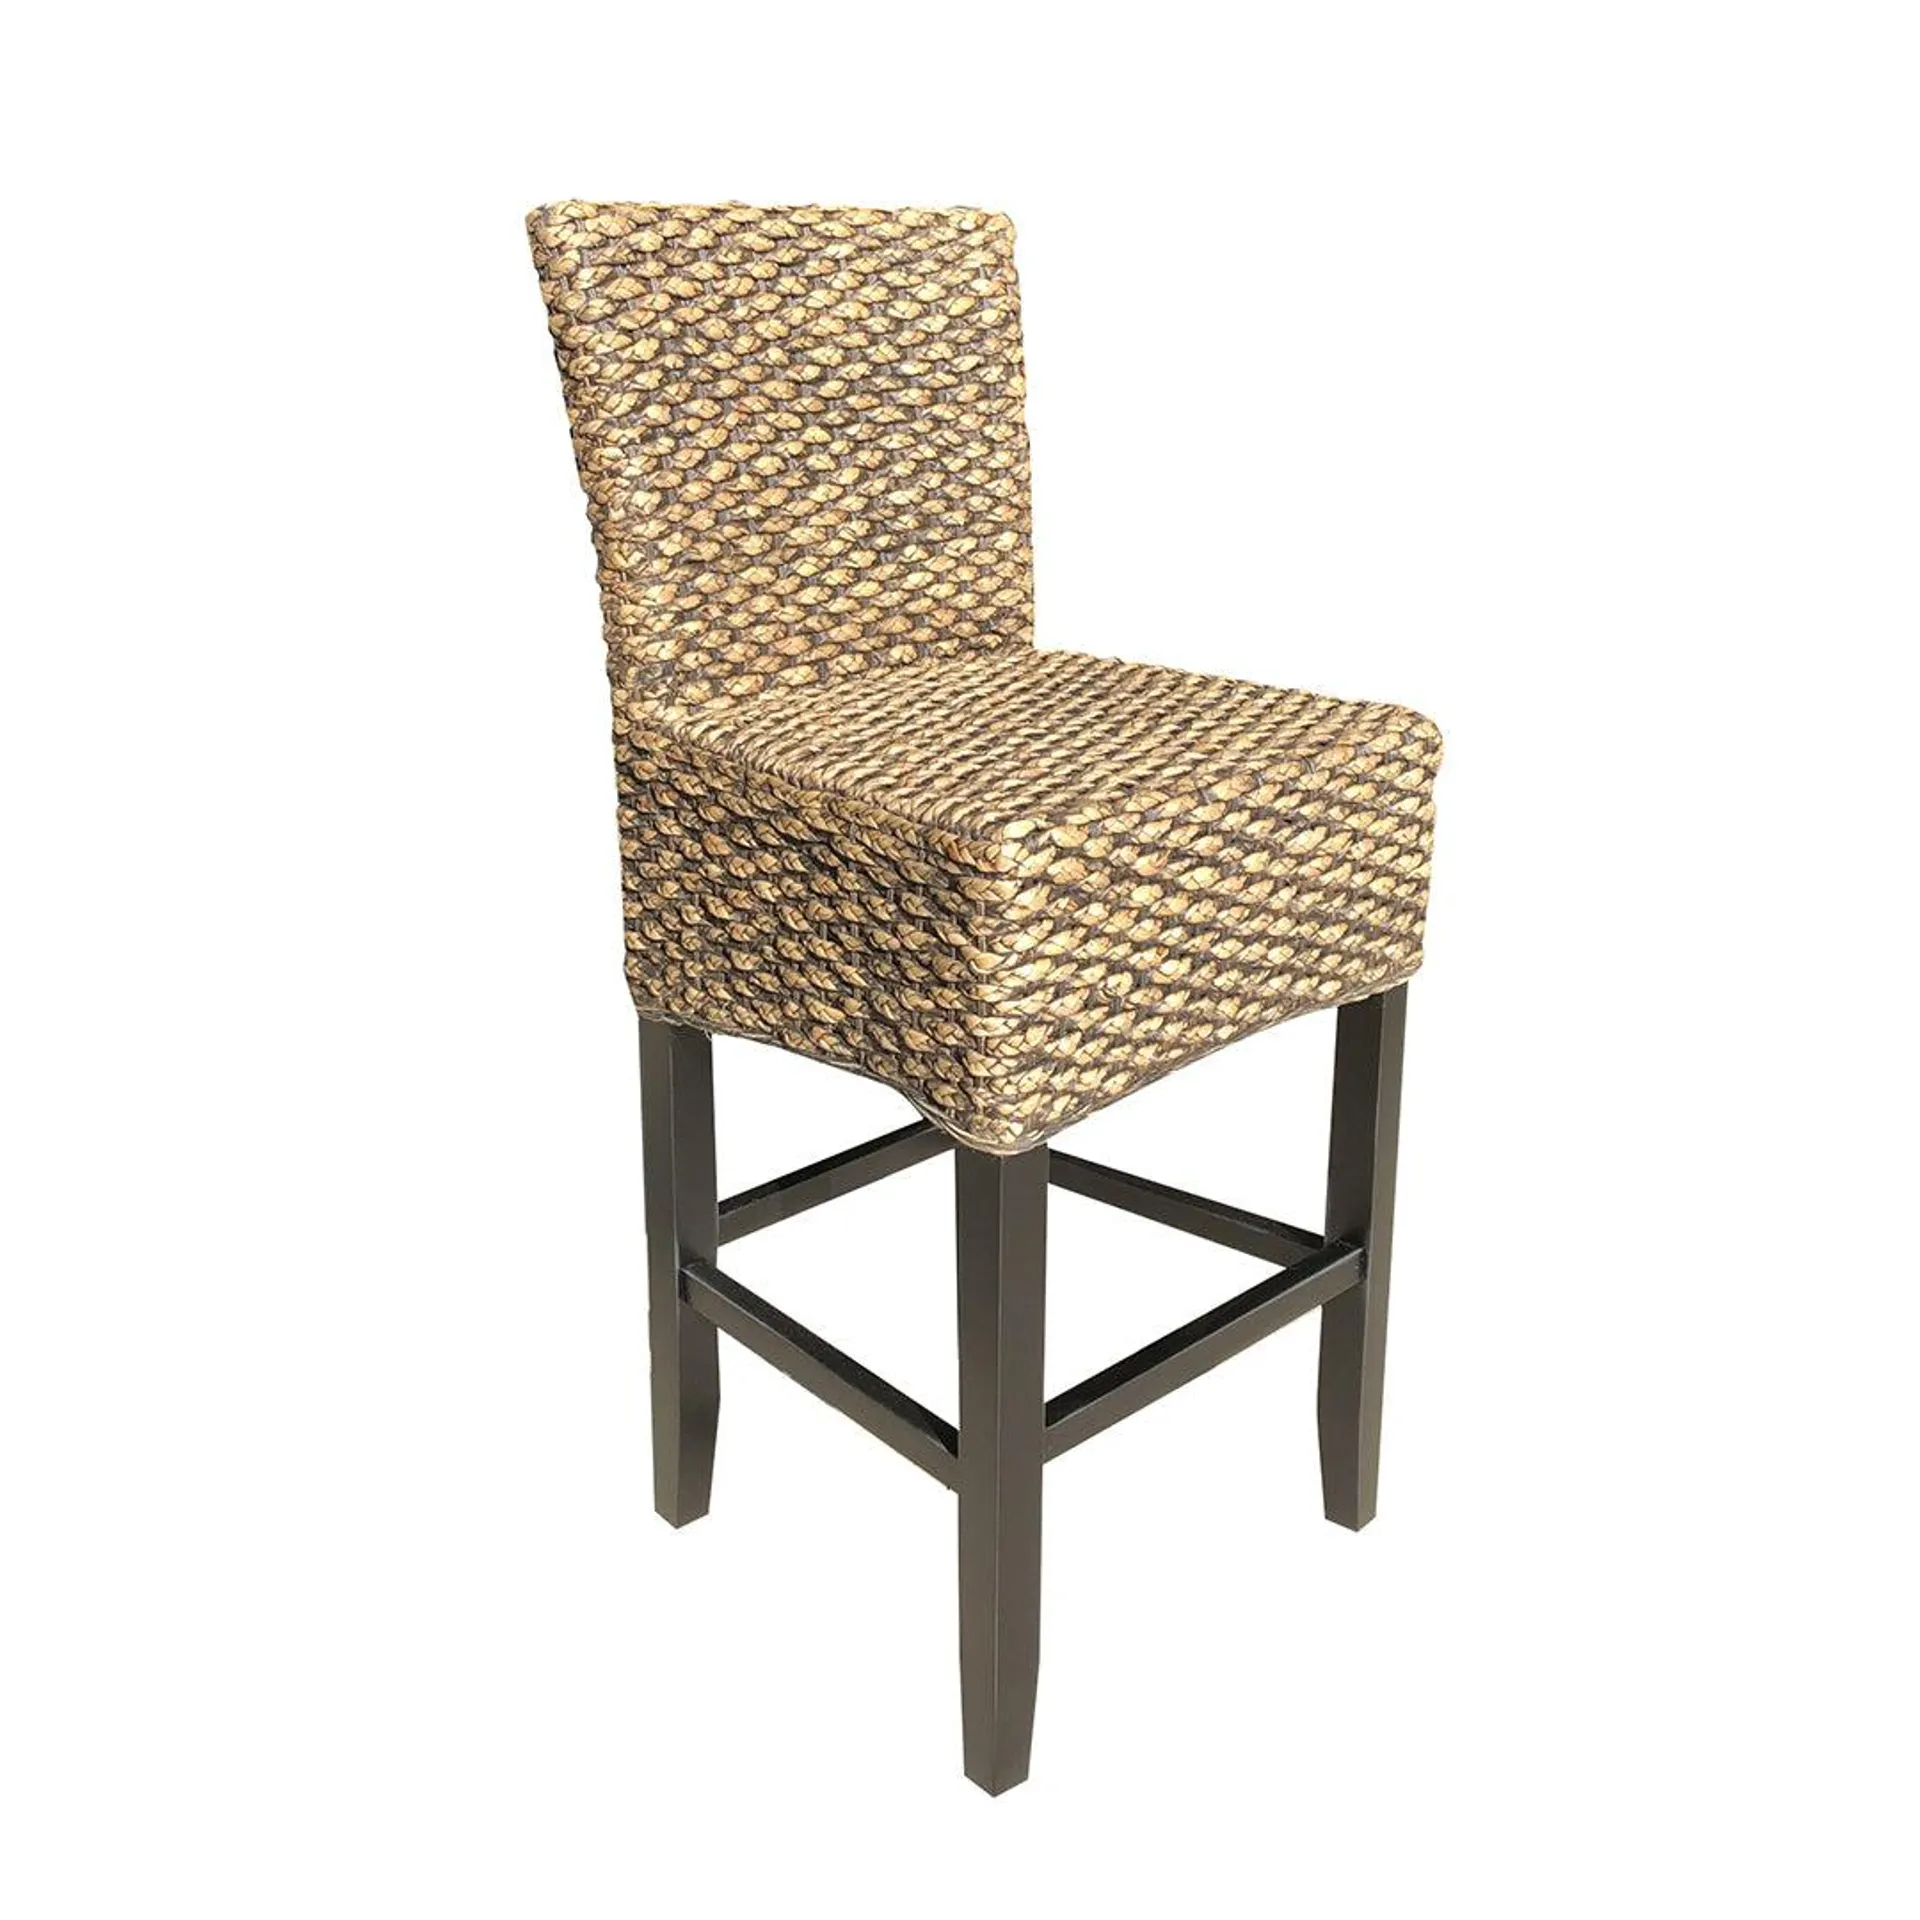 Pacific Barstool (2 colors 2 sizes)